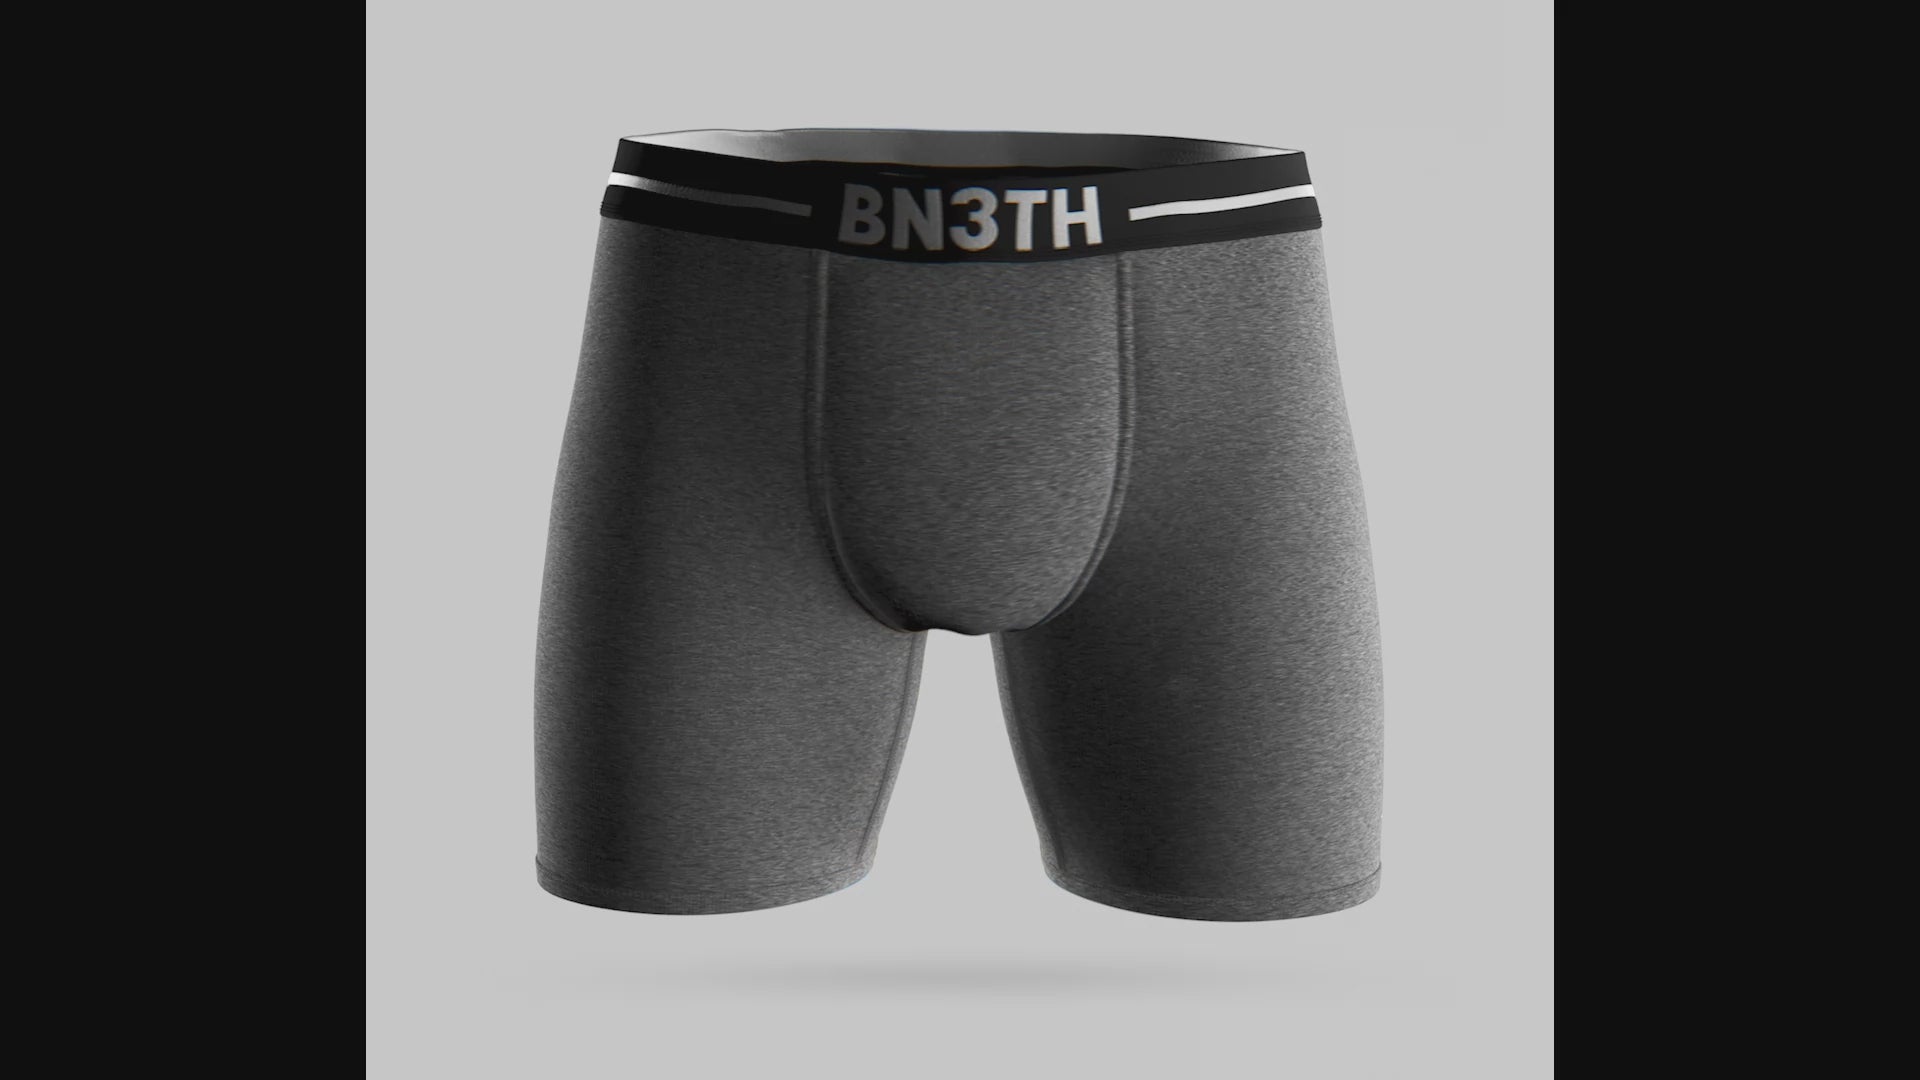 BN3TH Makes Its Debut at The PGA Show With Infinite Boxer Briefs